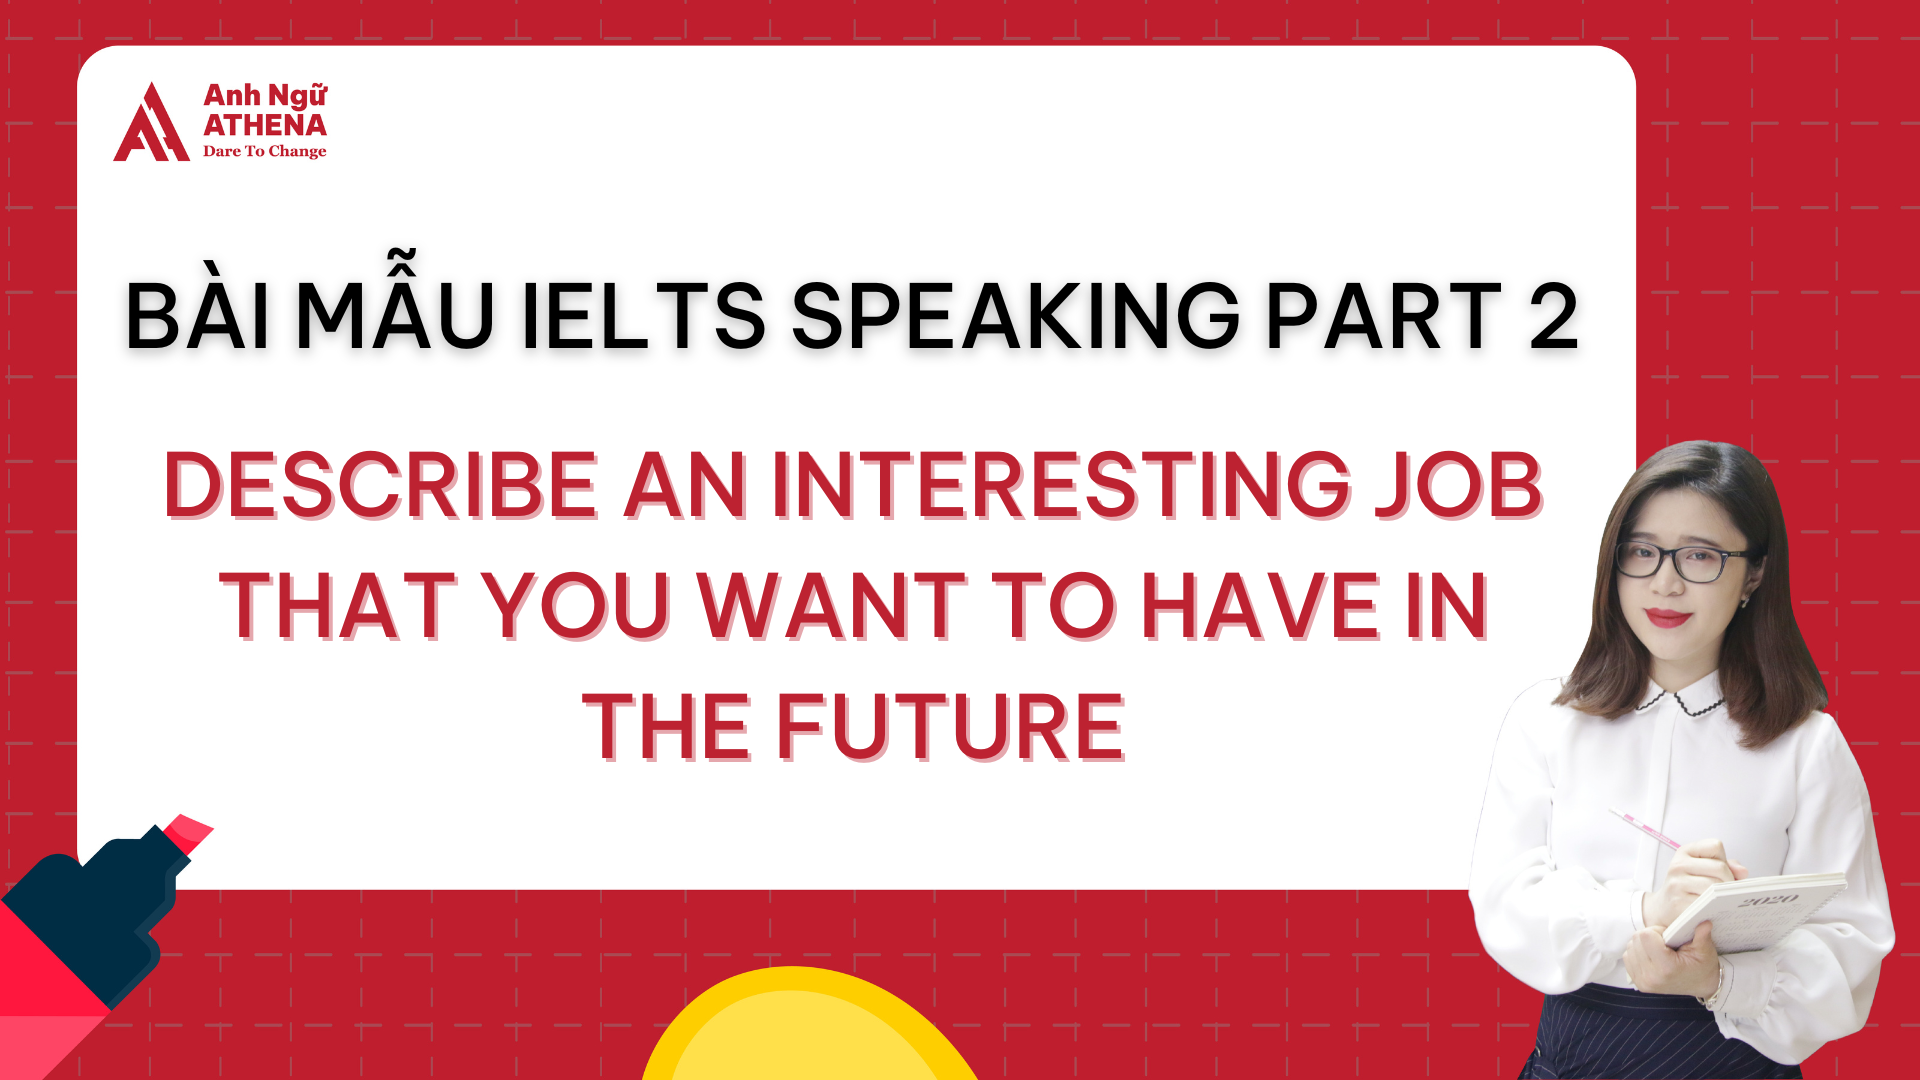 Bài mẫu IELTS Speaking Part 2 - Topic: Describe an interesting job that you want to have in the future